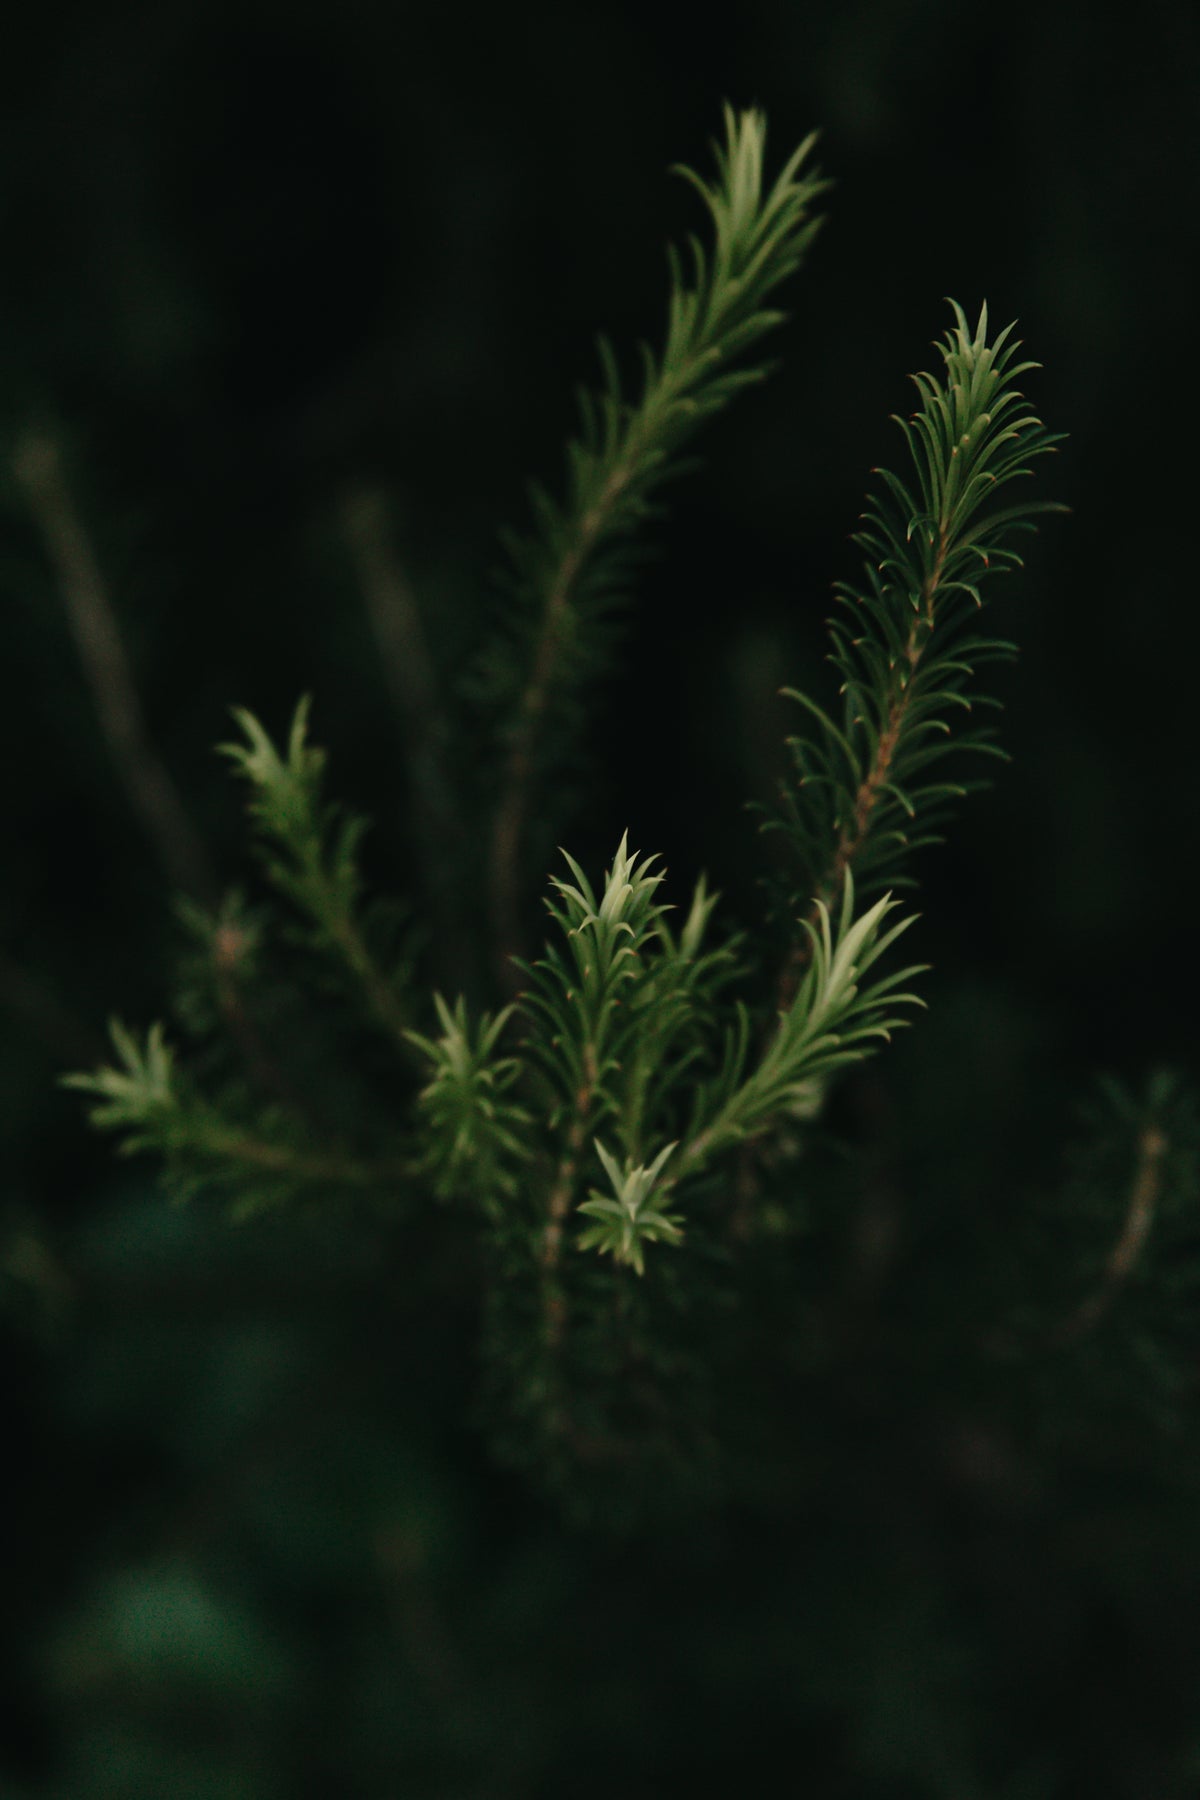 close up of the tips of evergreen needles